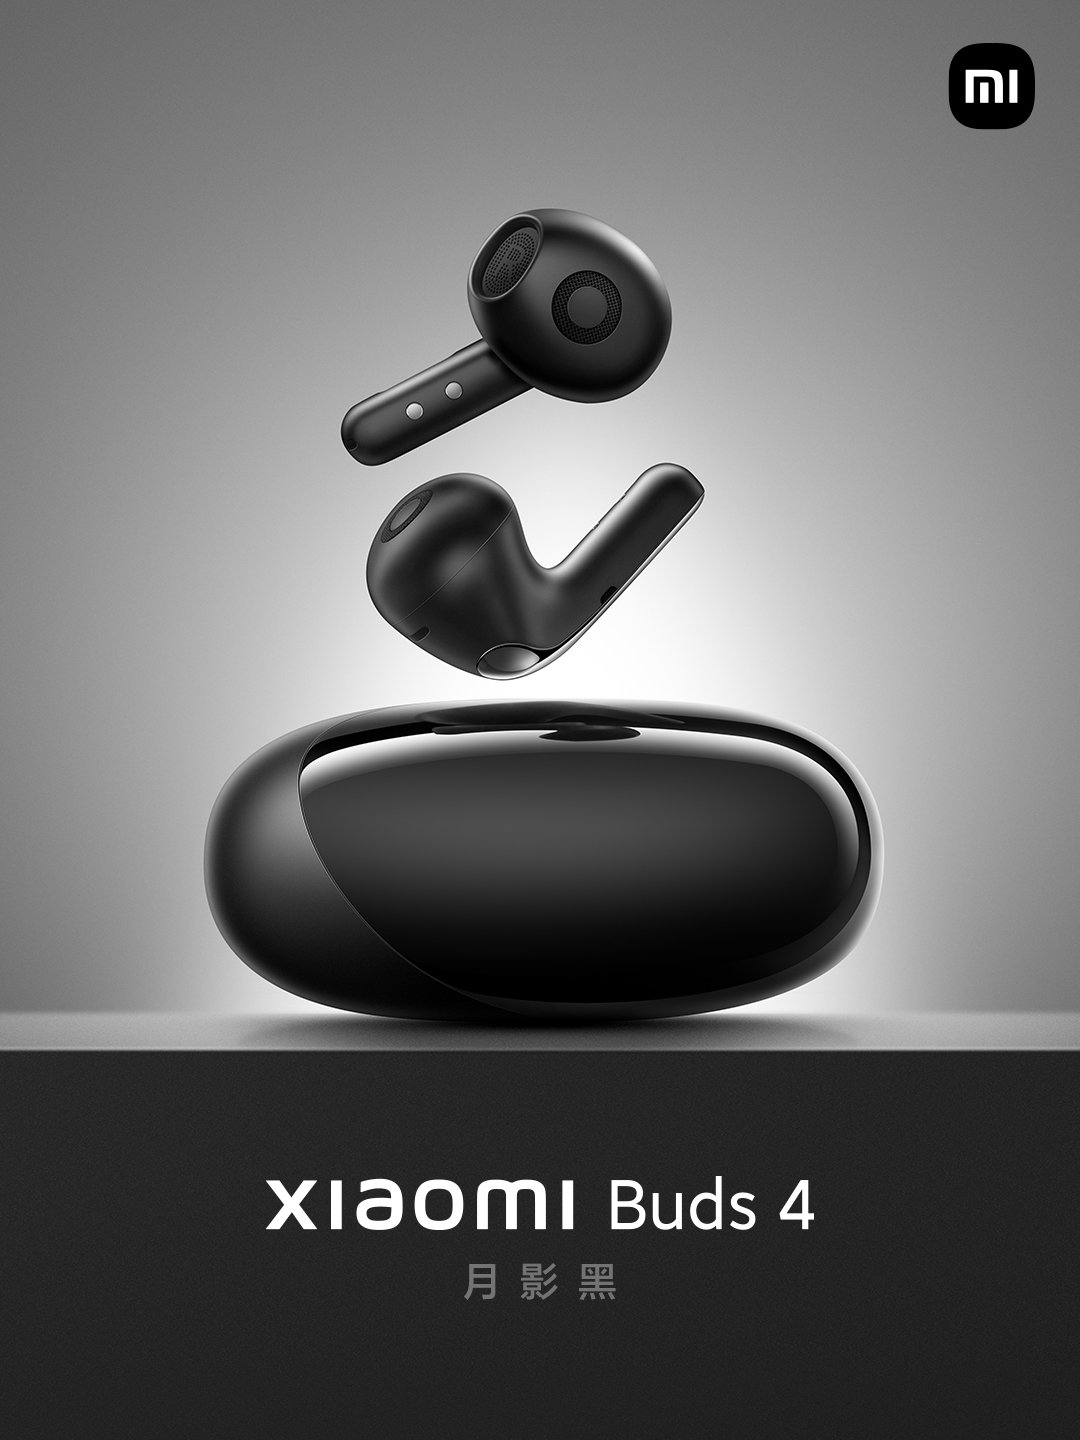 xioami buds 4 poster 2